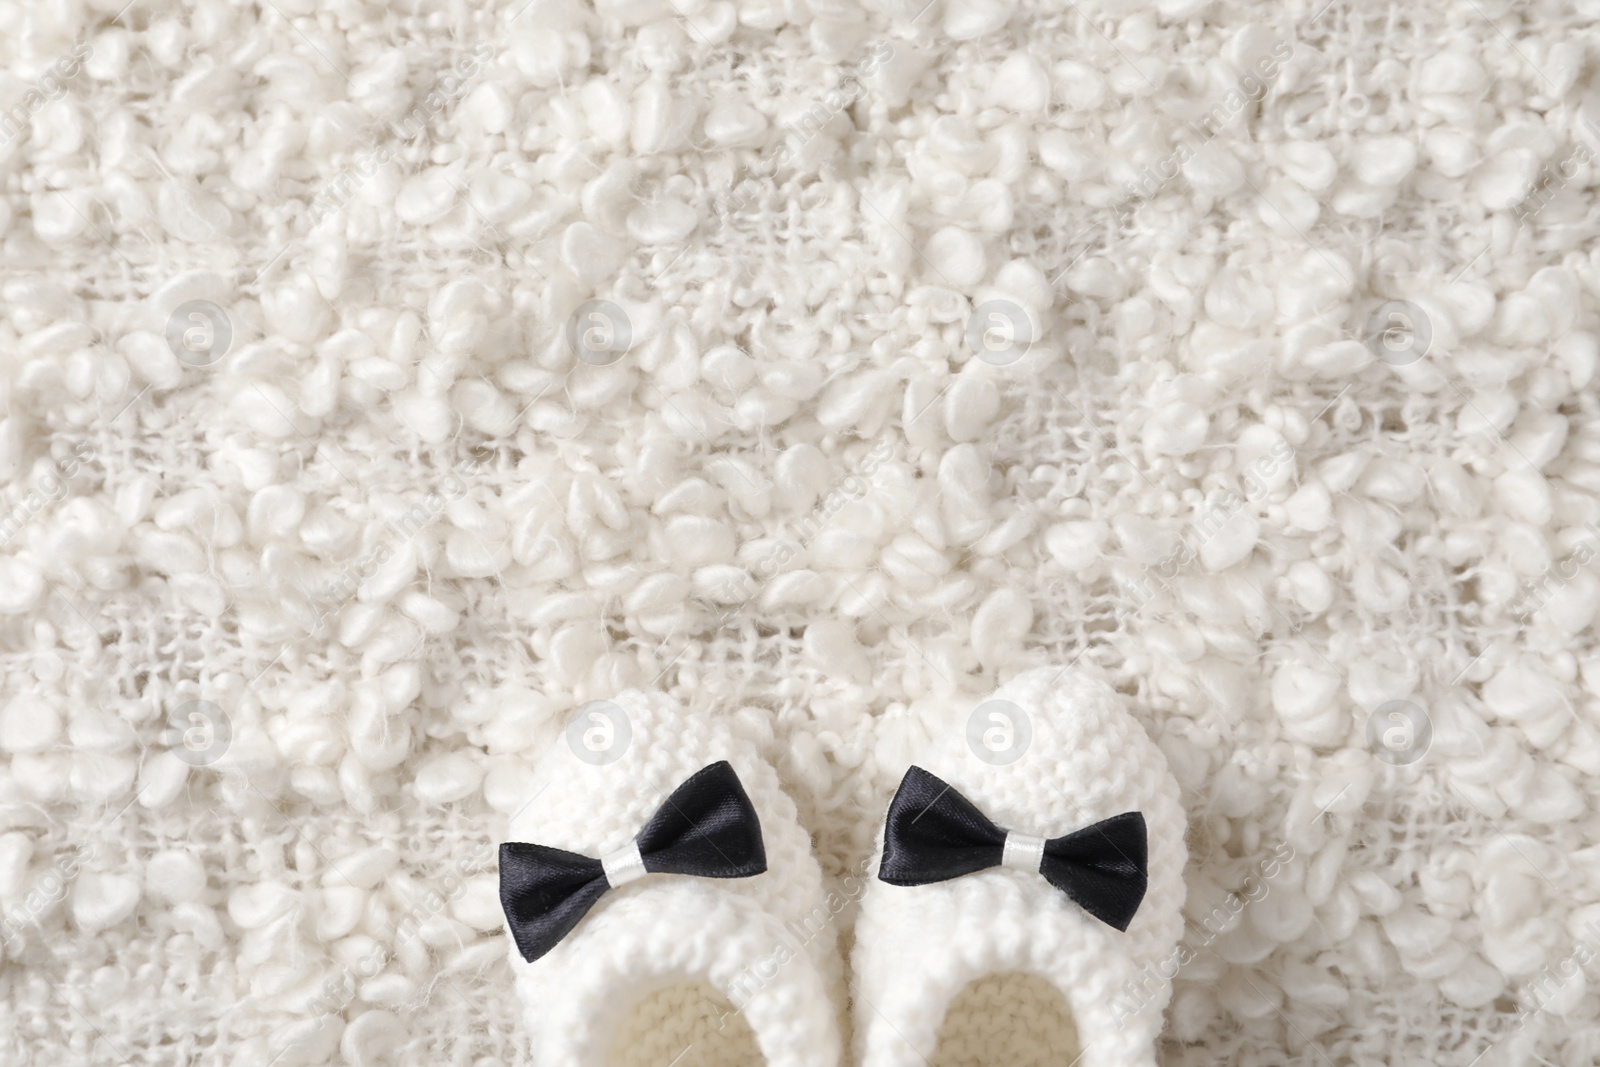 Photo of Handmade baby booties on soft plaid, top view with space for text